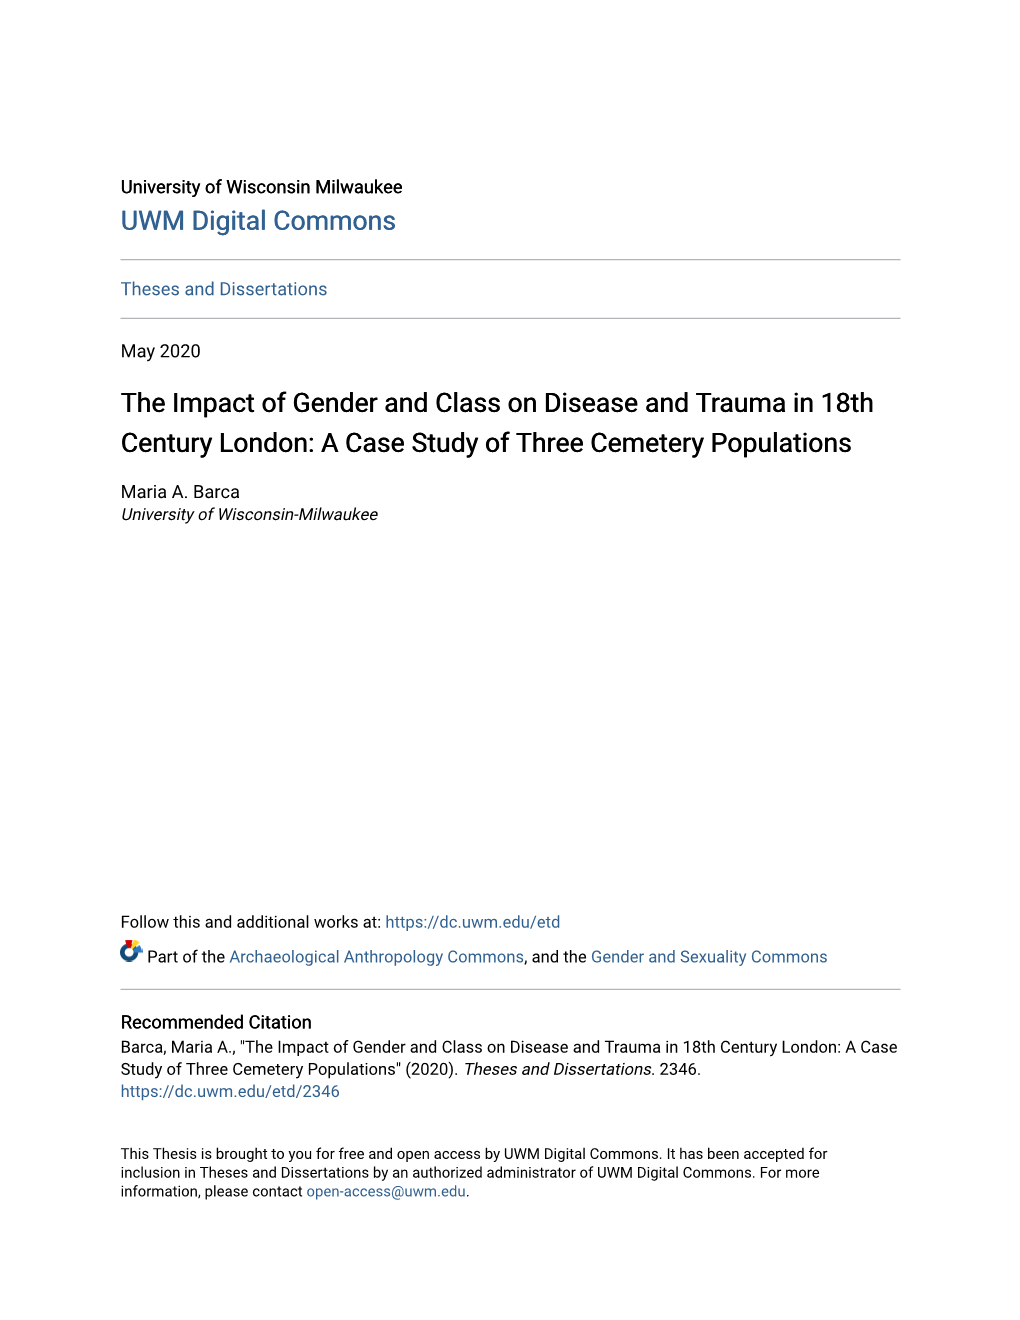 The Impact of Gender and Class on Disease and Trauma in 18Th Century London: a Case Study of Three Cemetery Populations